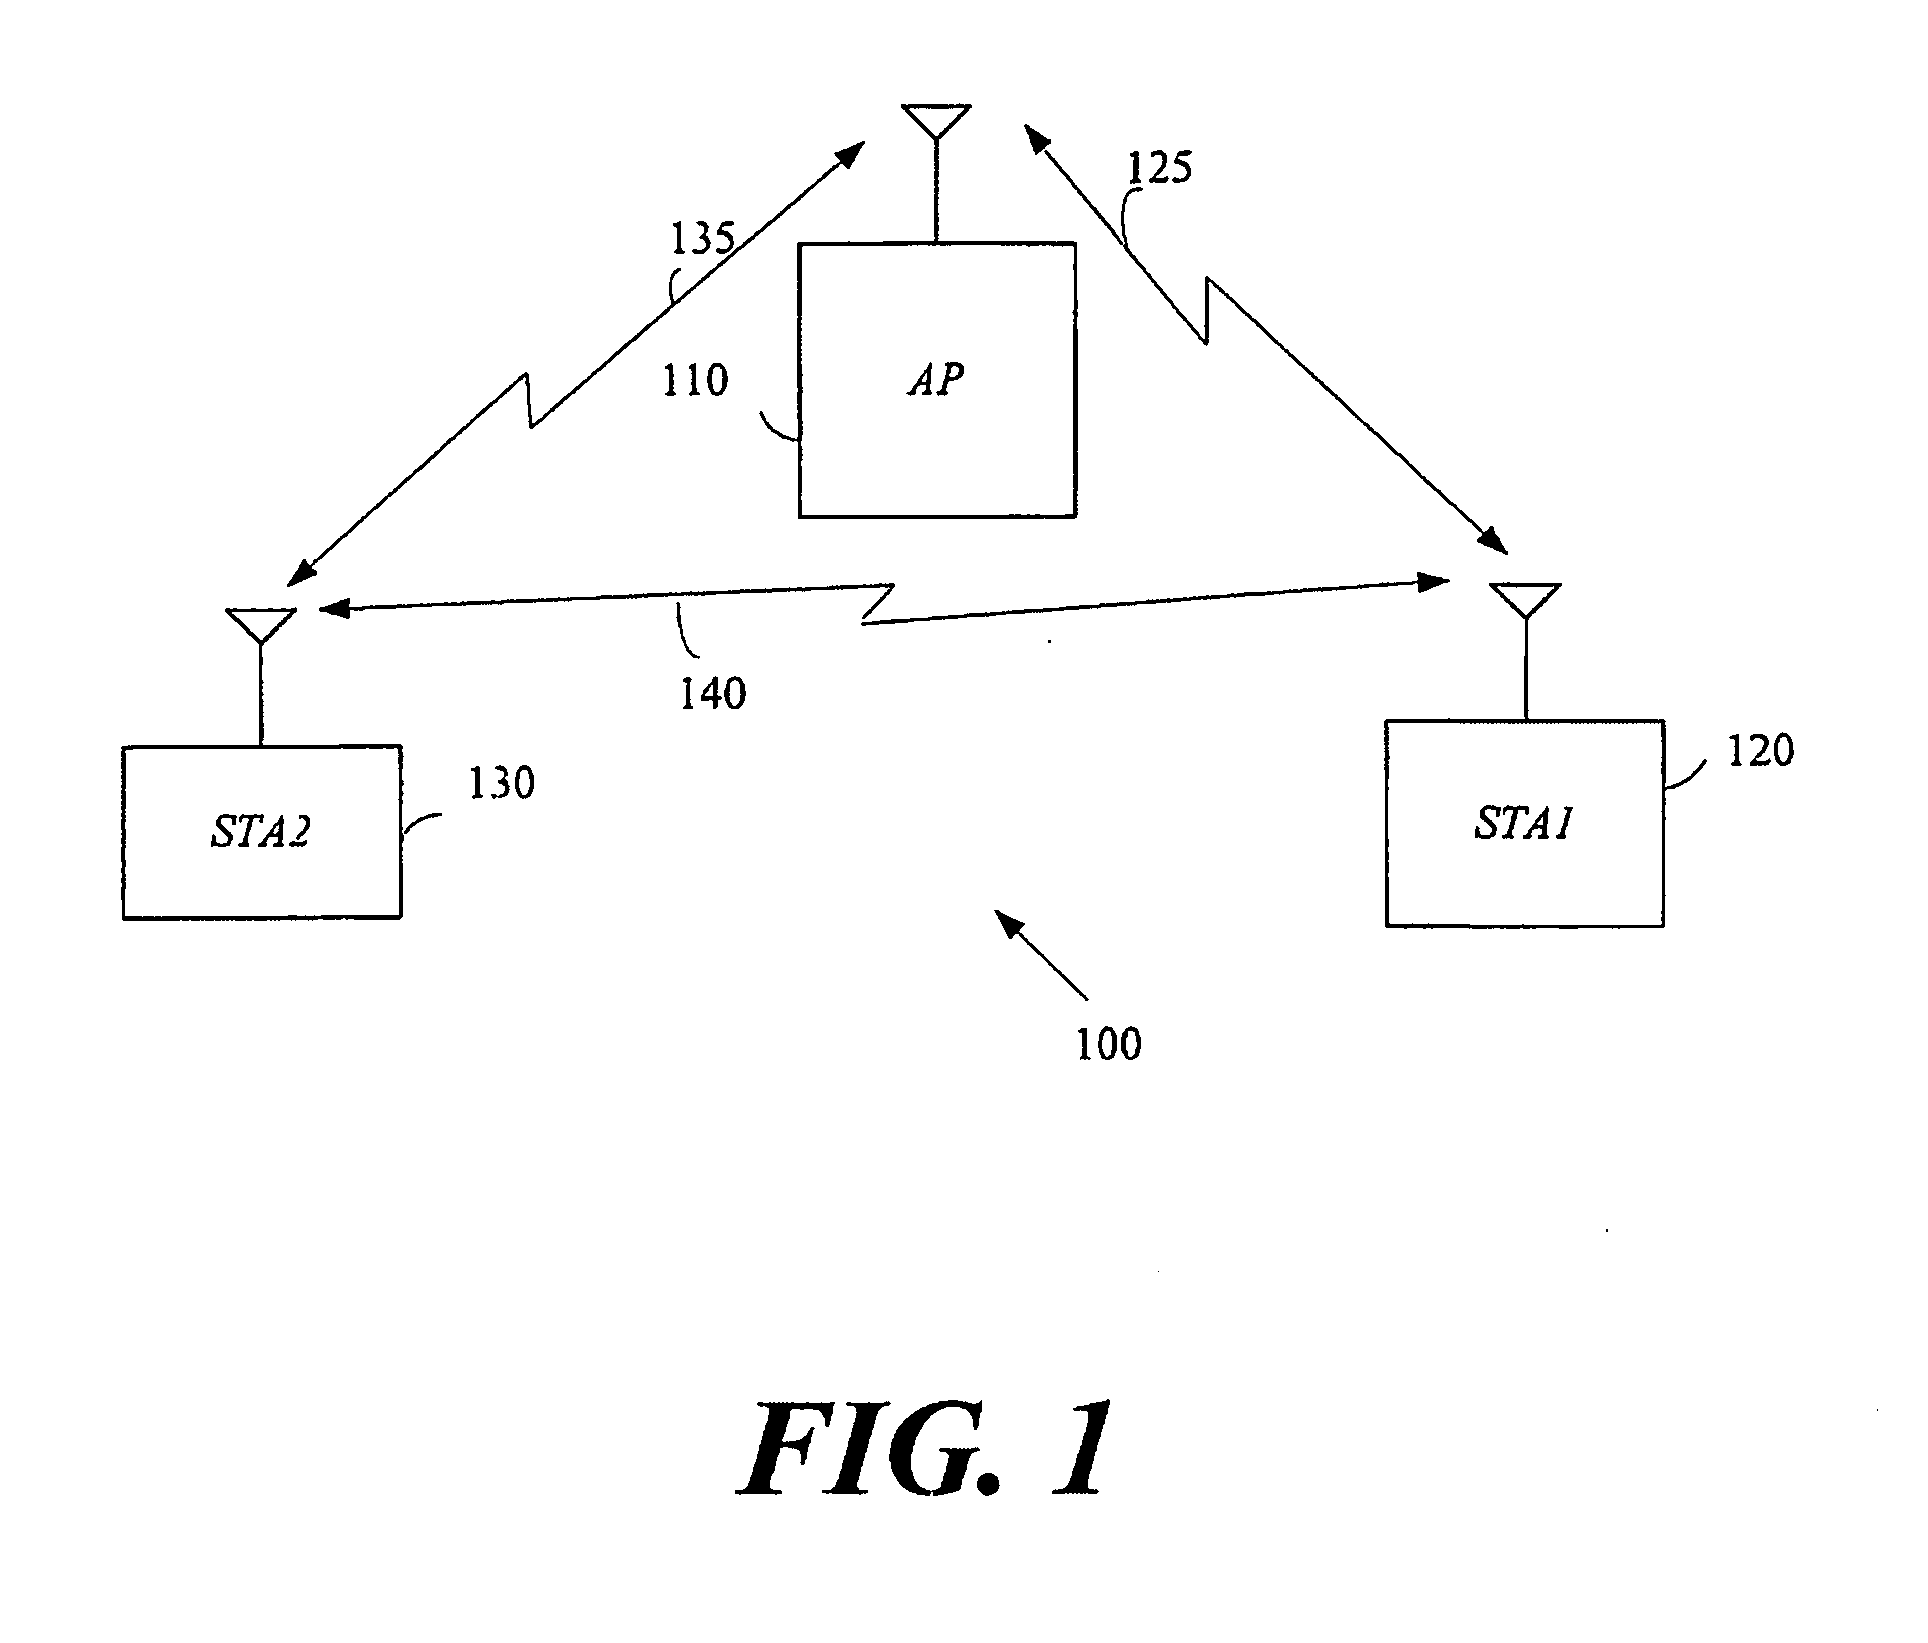 Method and apparatus to provide secured link